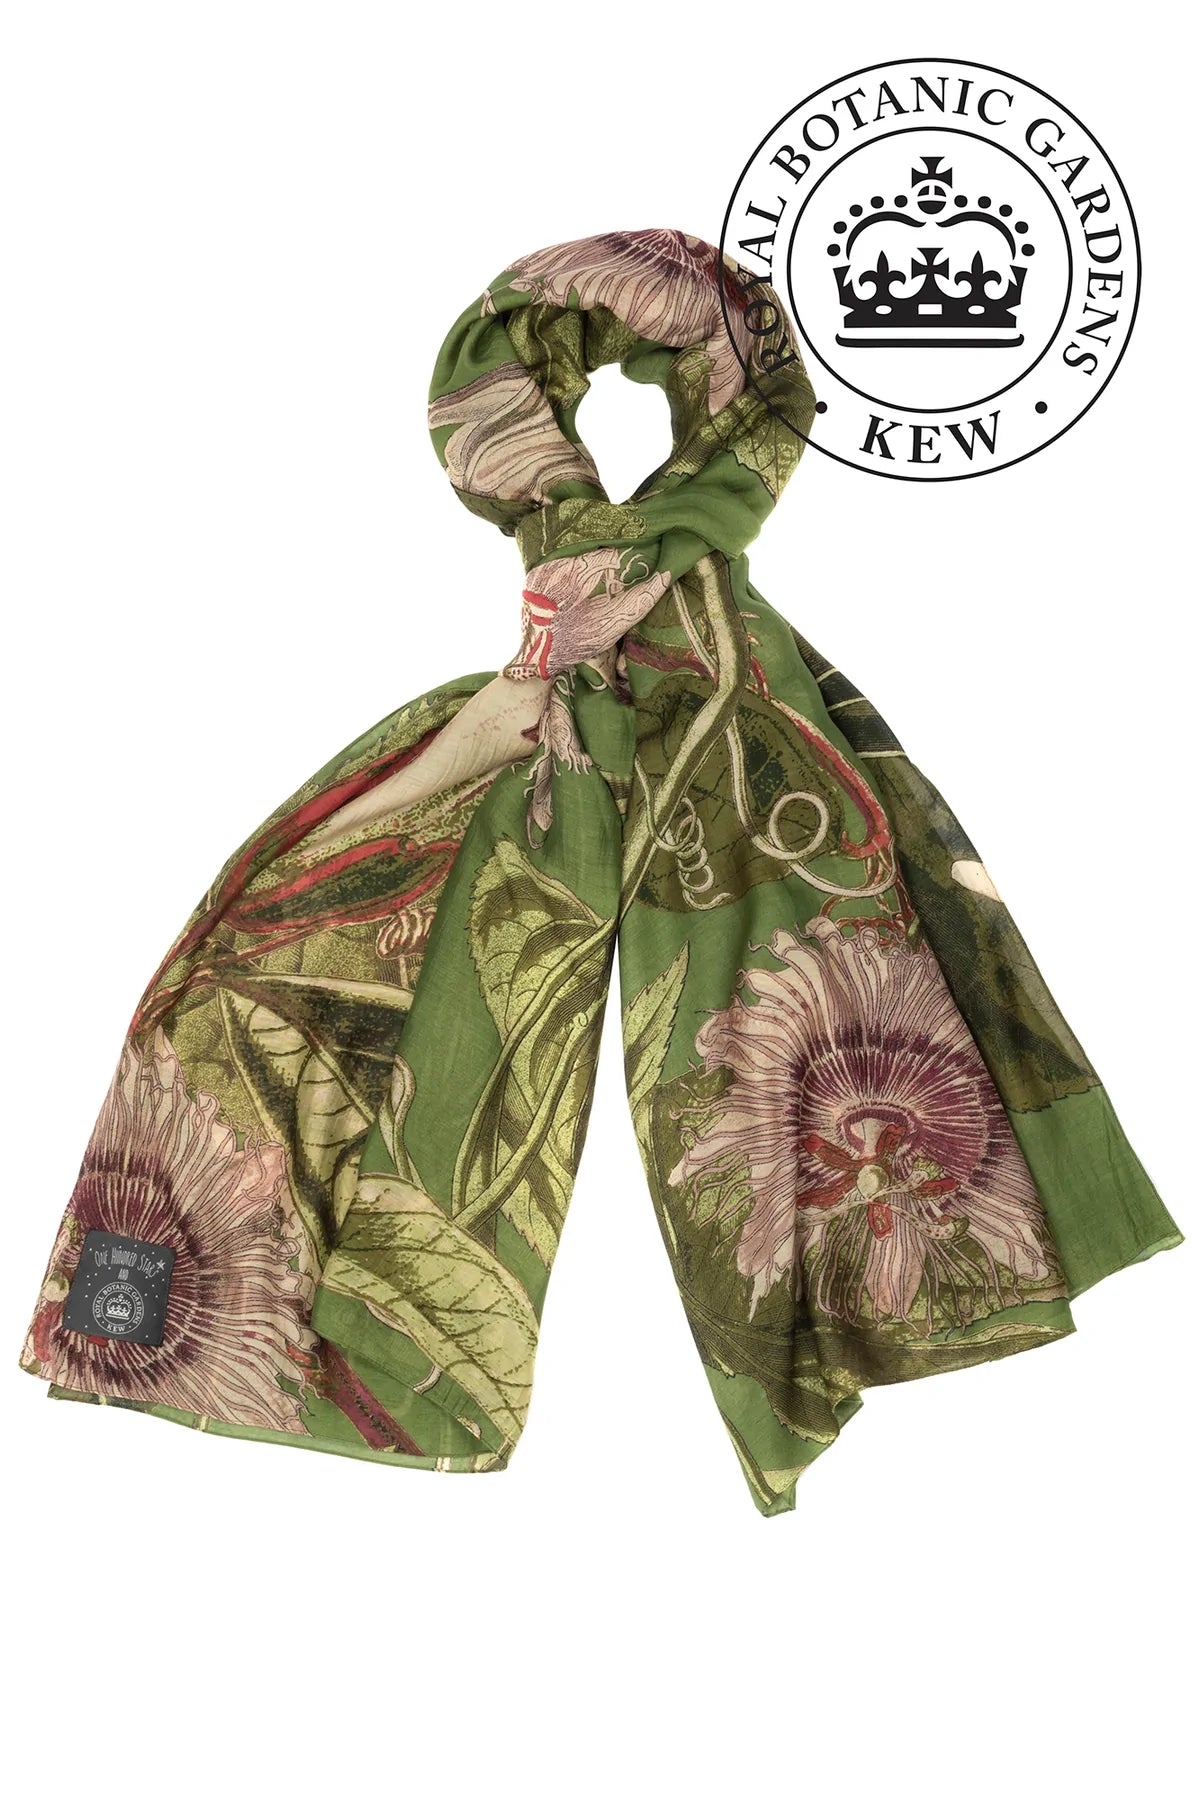 KEW Passion Flower Green Scarf